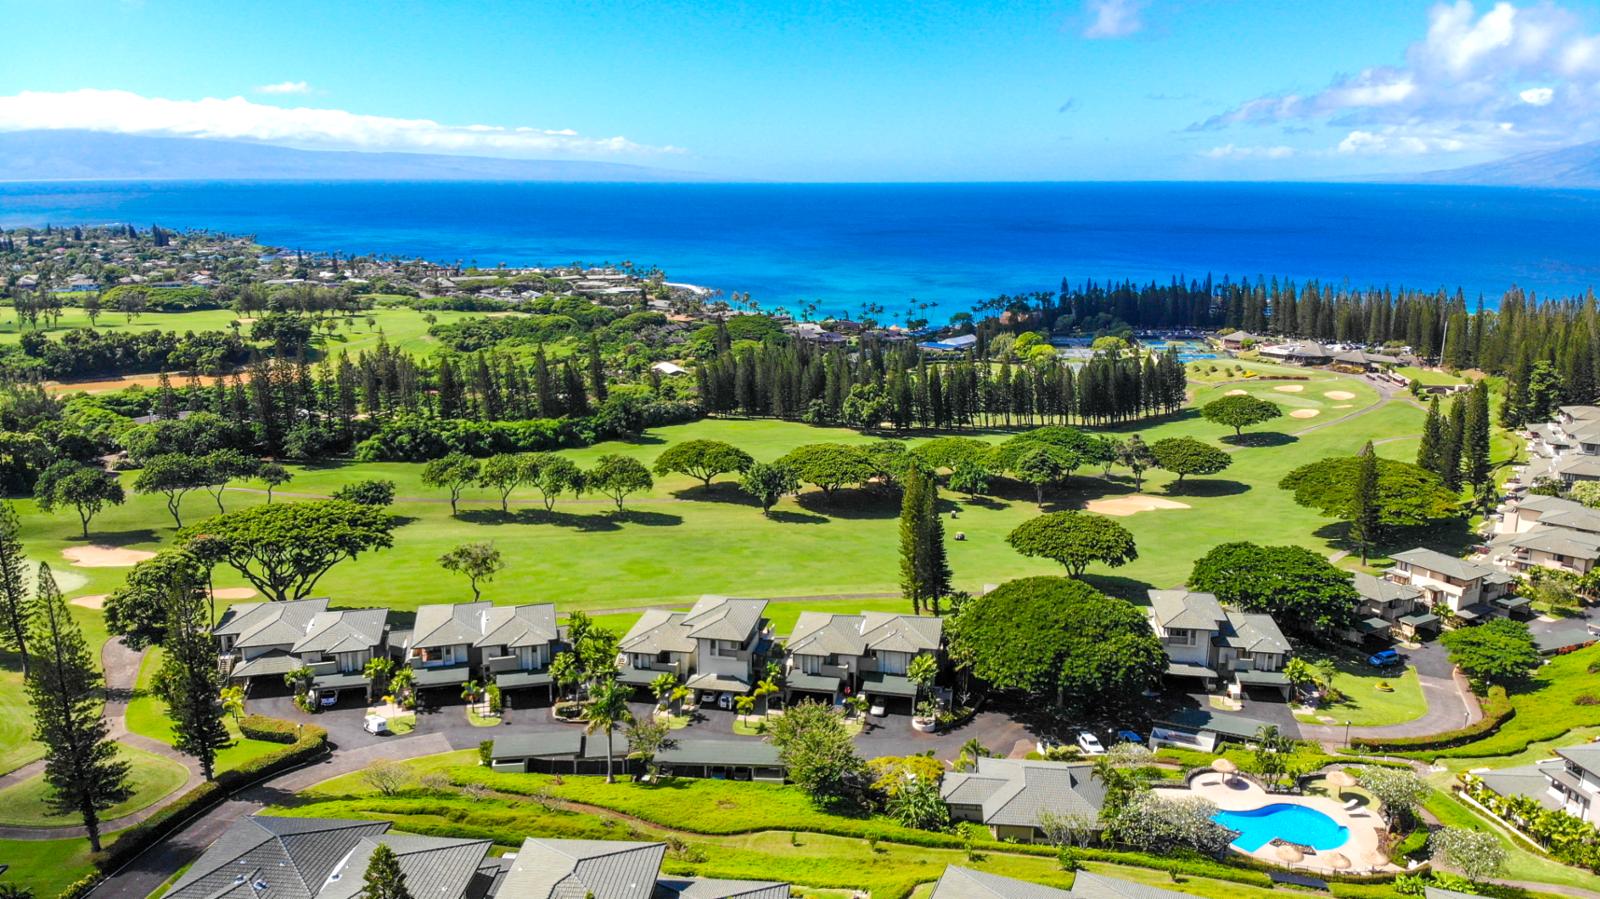 Are you ready to live like this in the exclusive Kapalua Golf Villas?